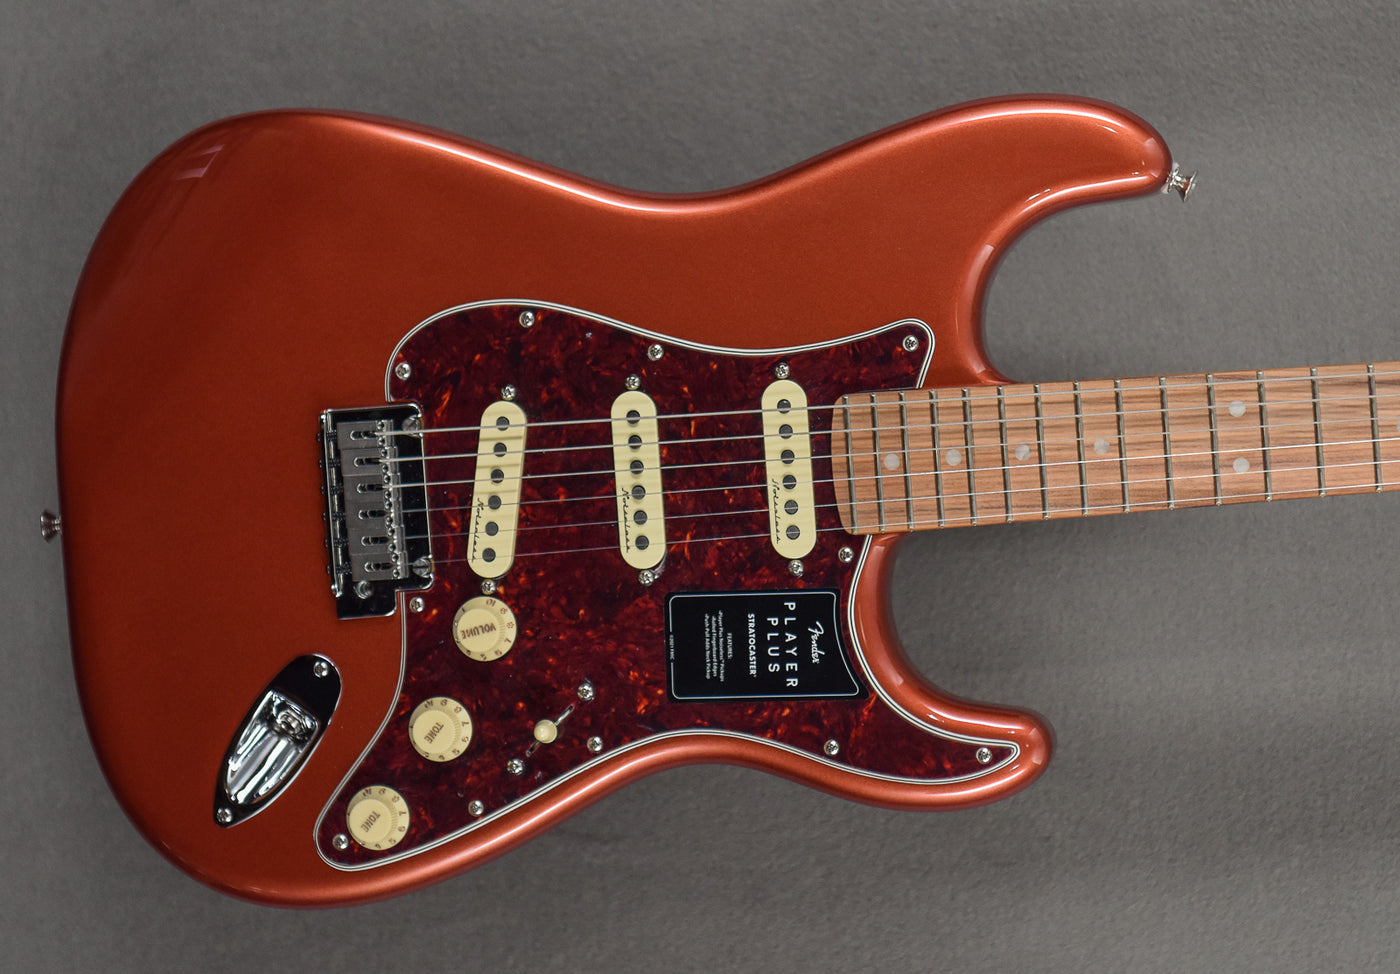 Player Plus Stratocaster - Aged Candy Apple Red